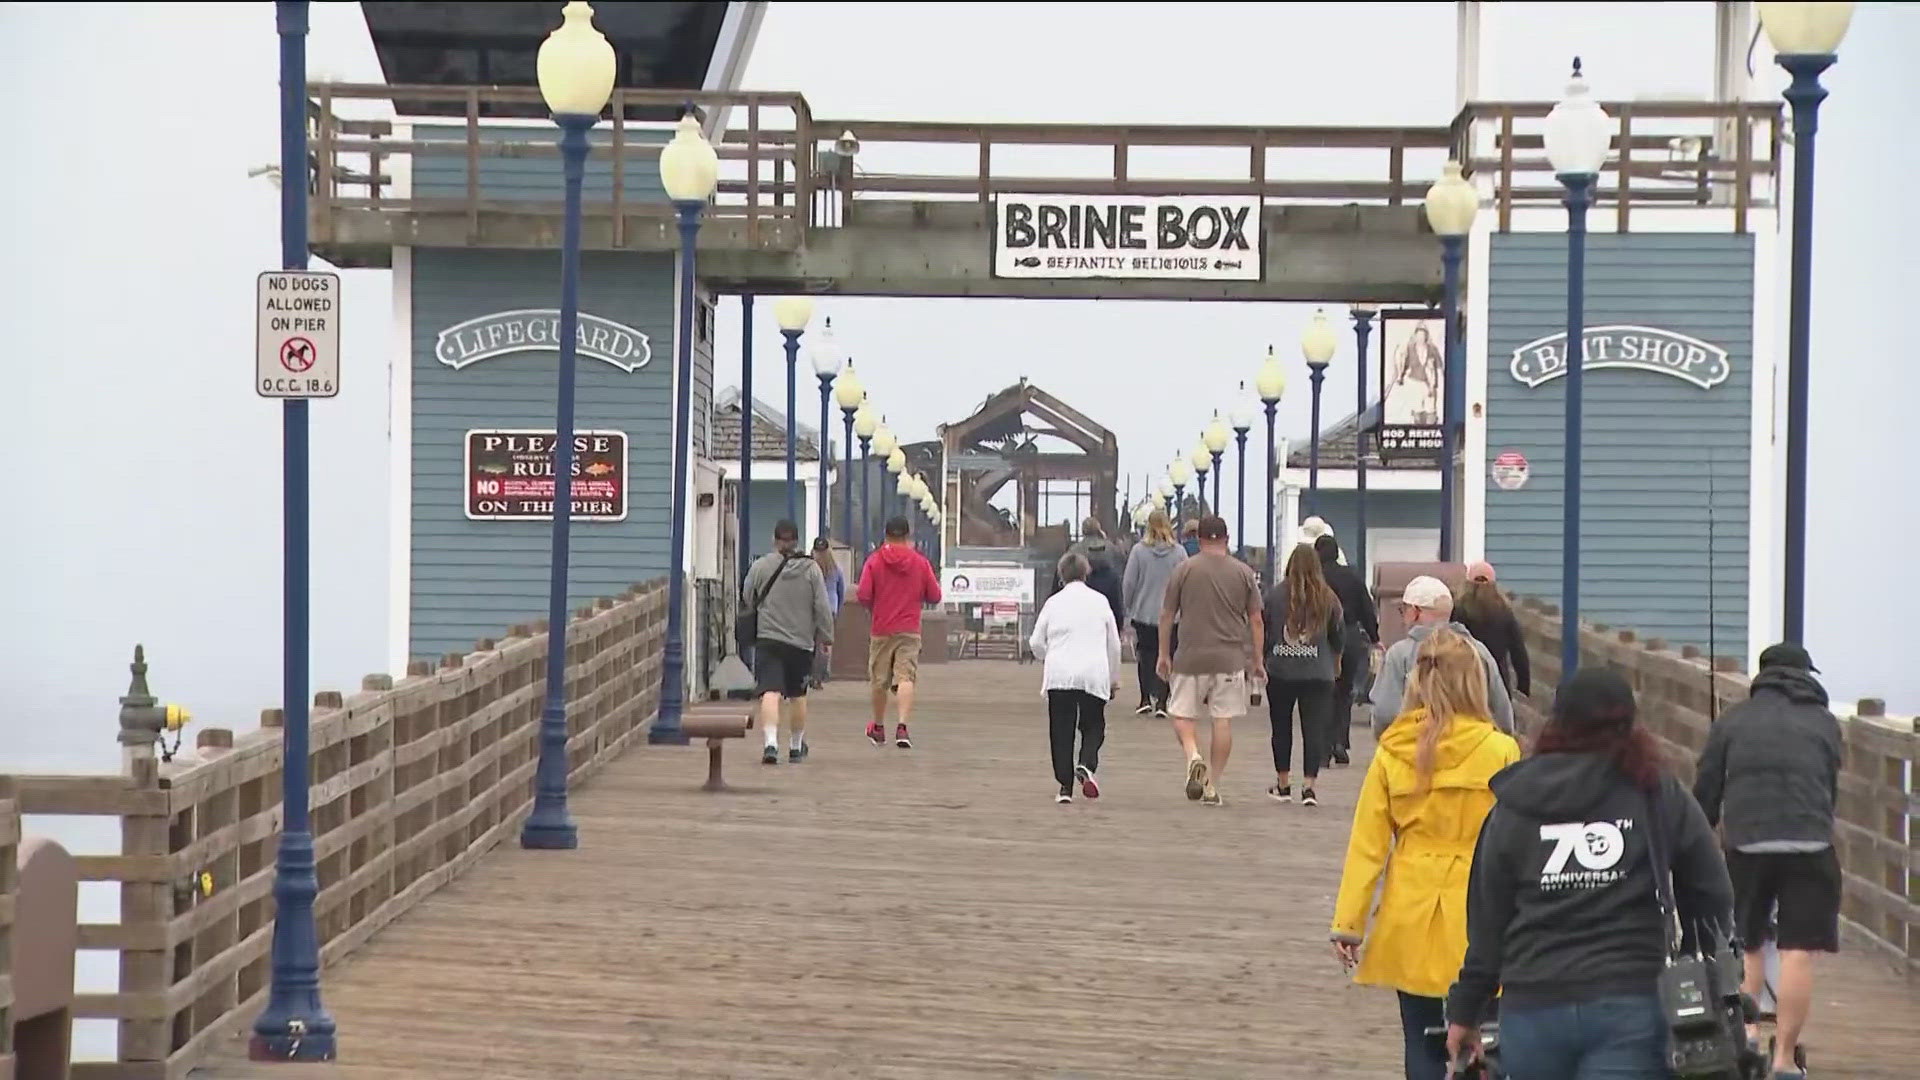 The pier reopened Friday at 7:00 a.m. and regular hours of 4:00 a.m. to 10:00 p.m. will begin Saturday.